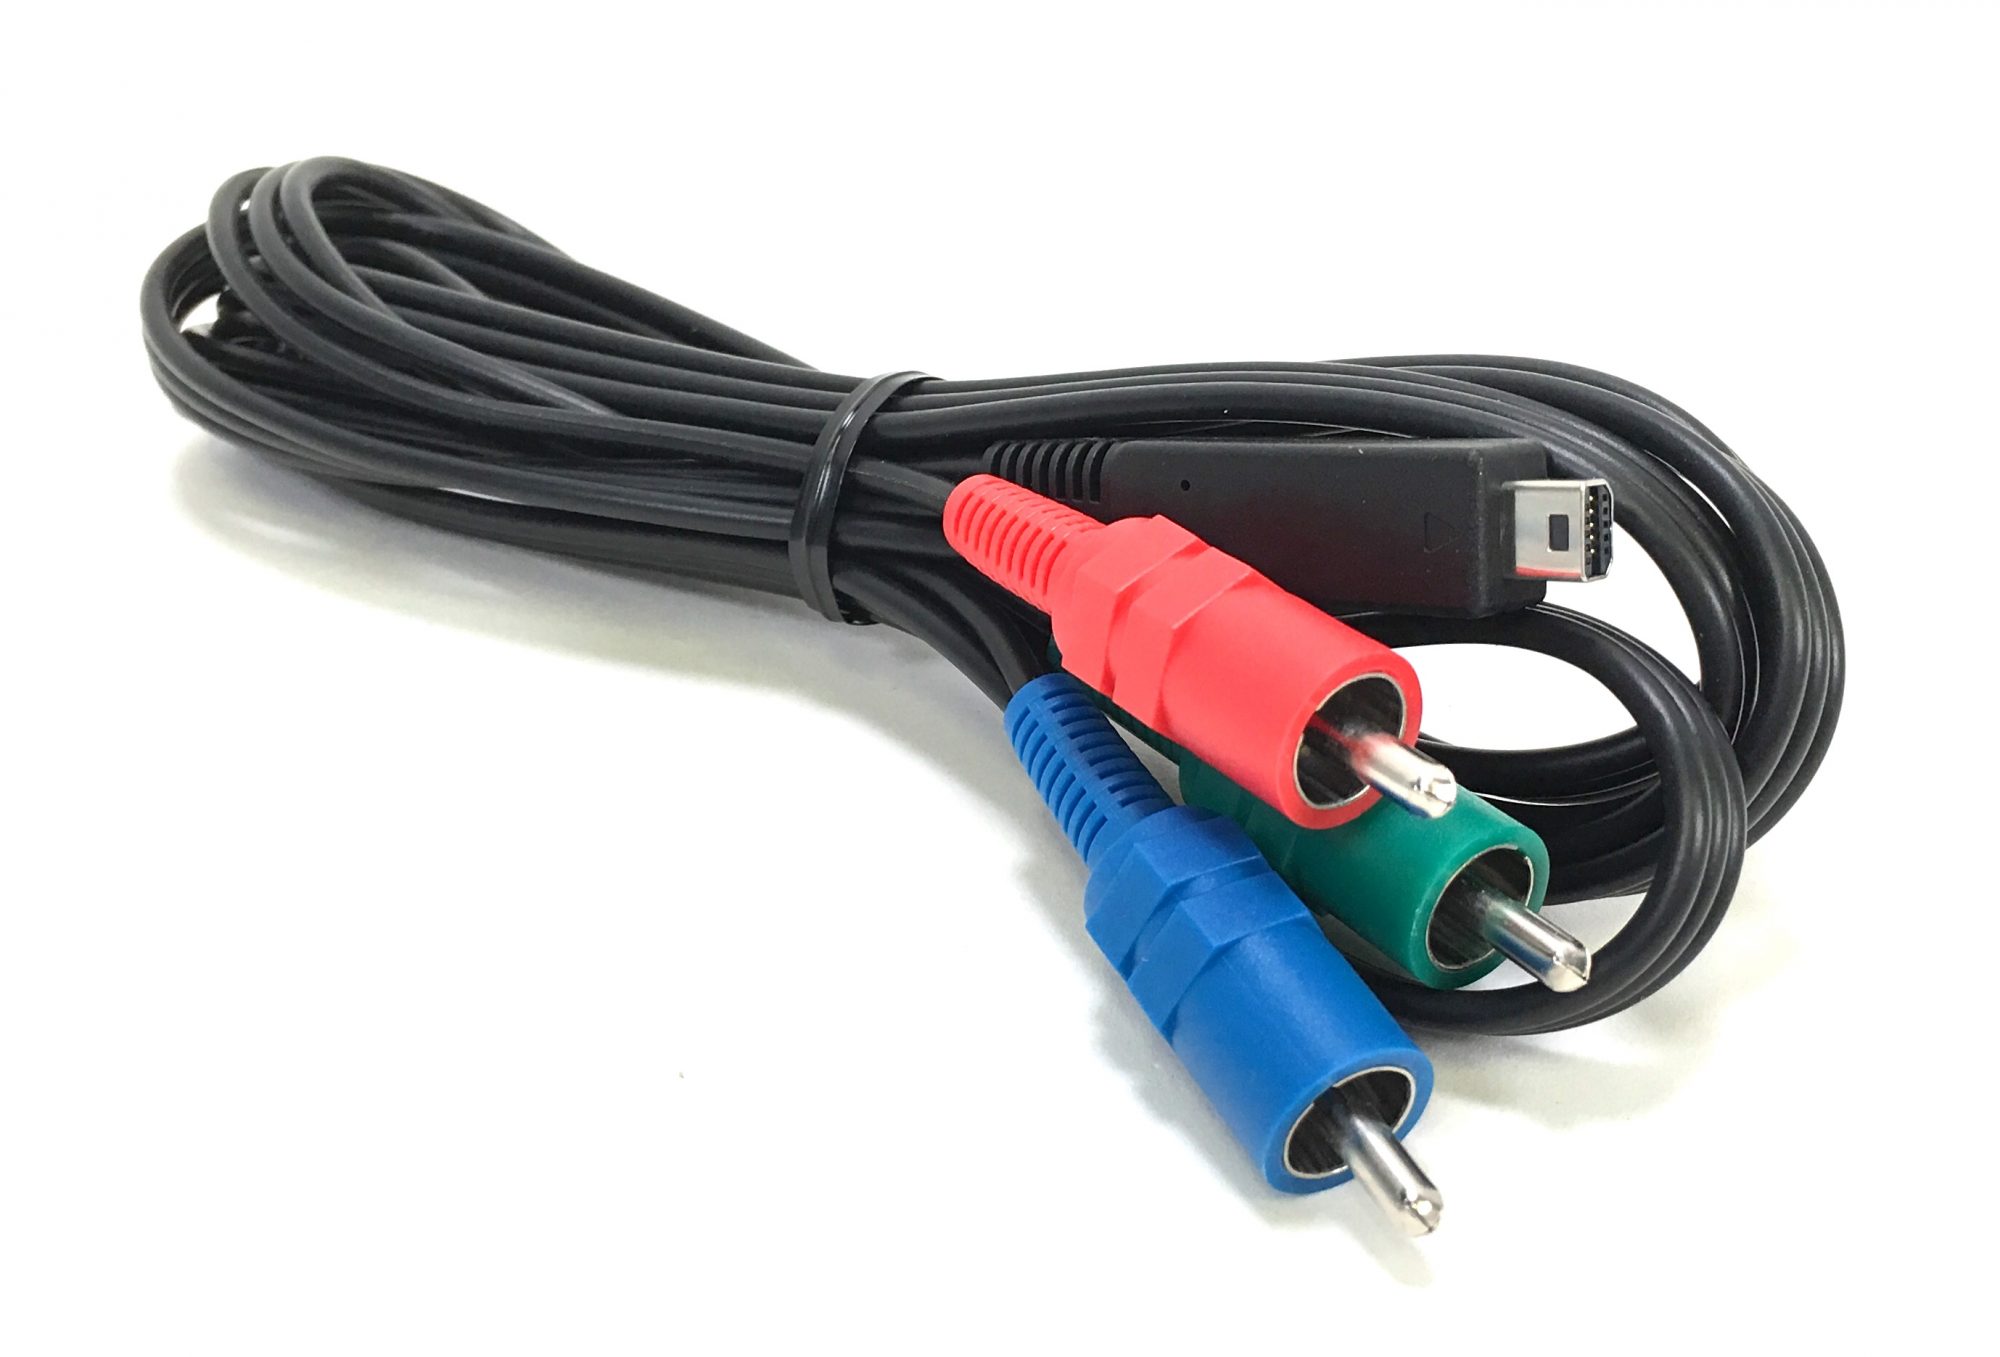 Original Component Video Cable that came with the Sony GV-HD700 deck. It is a genuine Sony part, sourced directly from Sony USA. Brand new factory fresh. Free Shipping.